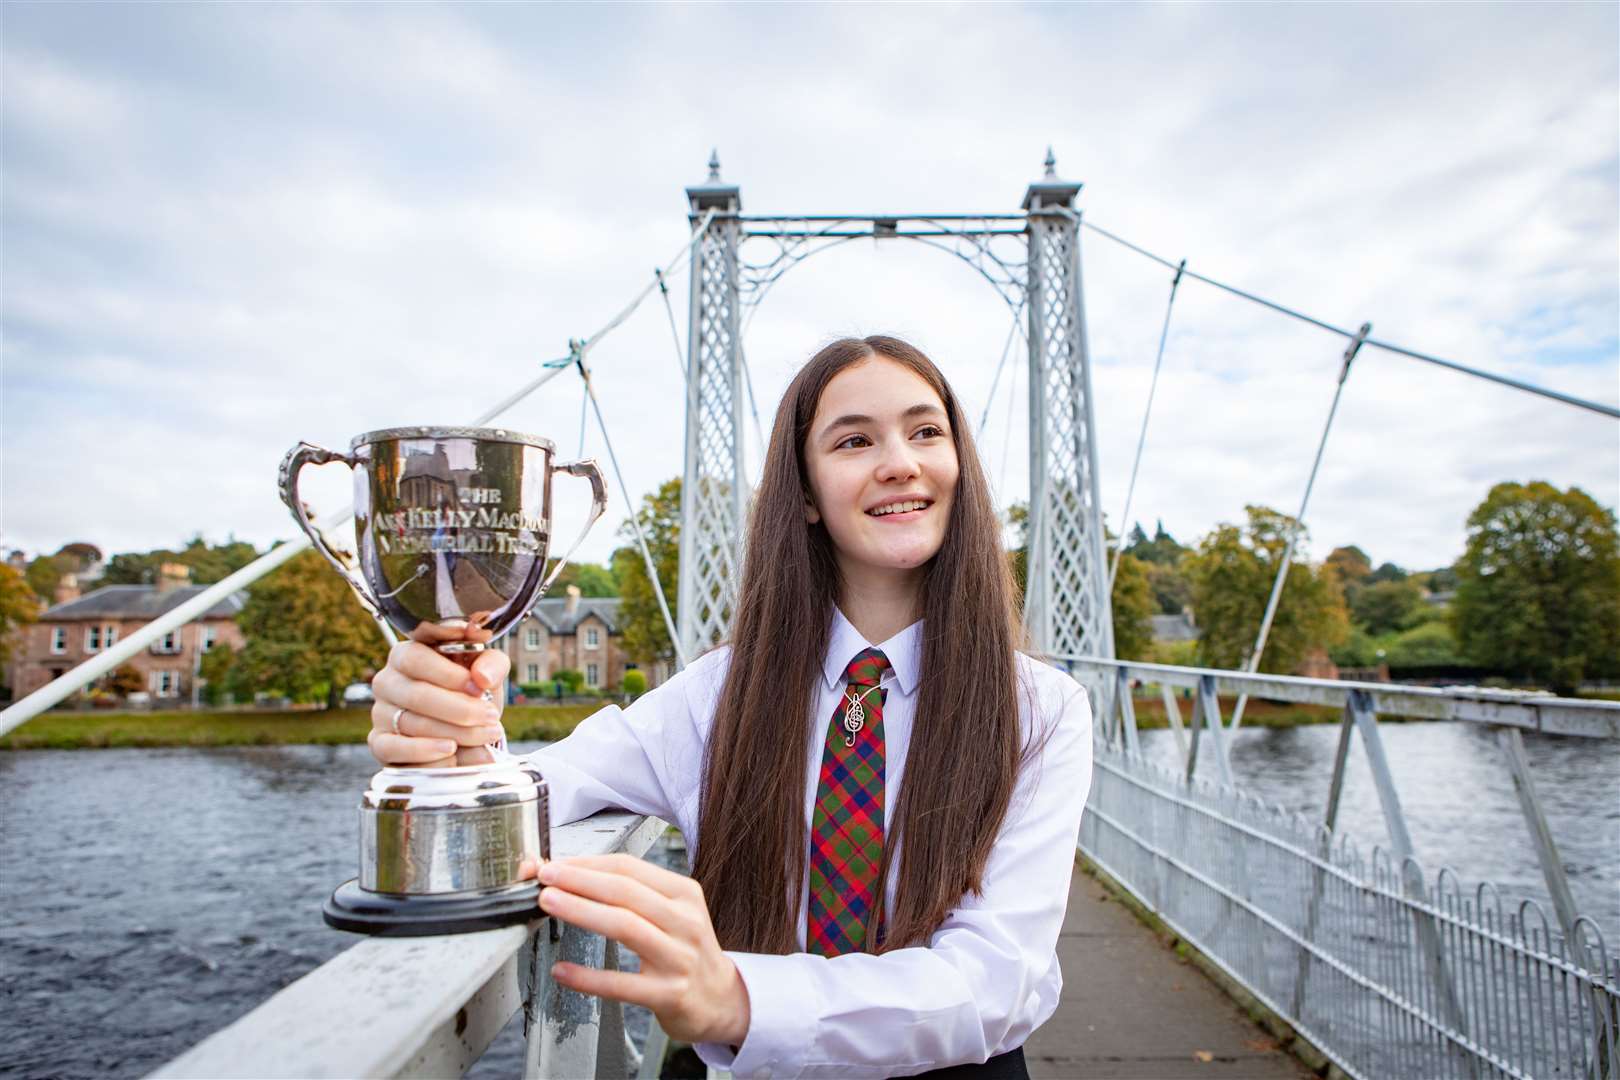 Picture shows Maria Monk, age, from Glasgow Gaelic School winner of the Solo Singing Fluent - Girls ages 13-15 - Traditional Silver Pendant at The Royal National Mòd 2021, in Inverness, Scotland, photographed wearing her Silver Pendant prize and holding the Ann Kelly MacDonald Memorial Trophy at the River Ness on Tuesday 12th October 2021